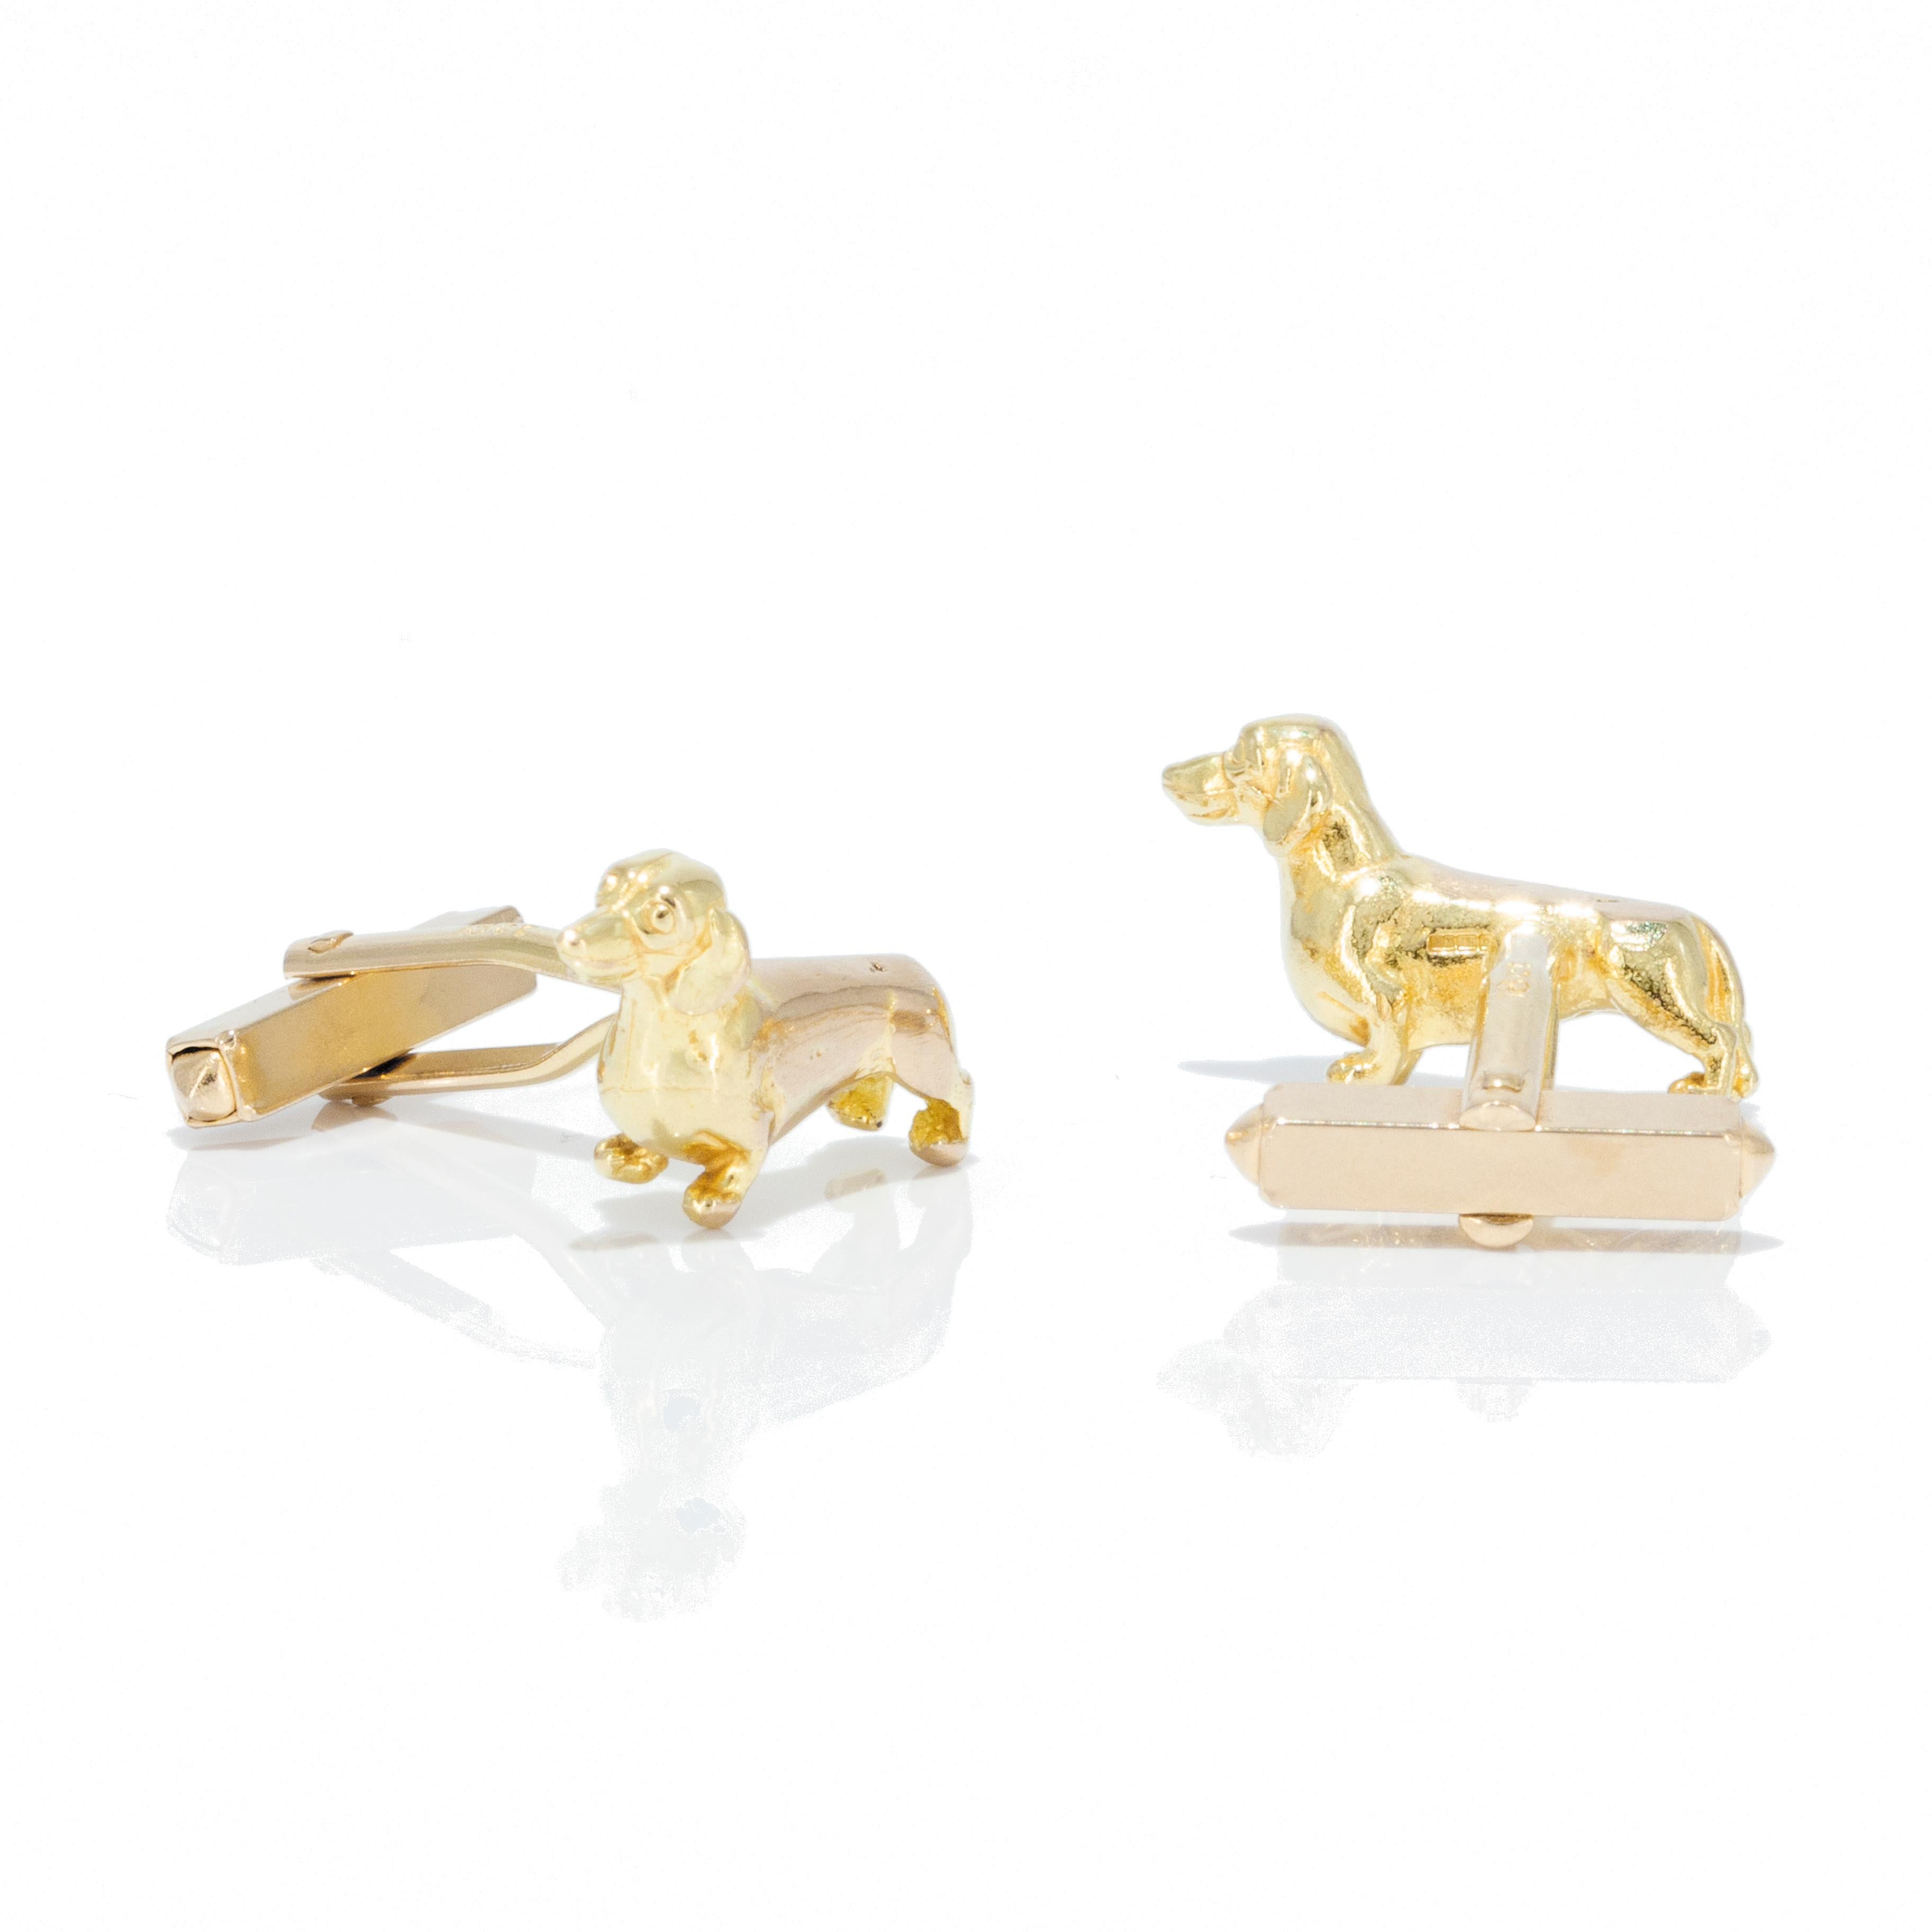 Dachshund Cufflinks in Solid 9 Karat Gold In New Condition For Sale In London, GB